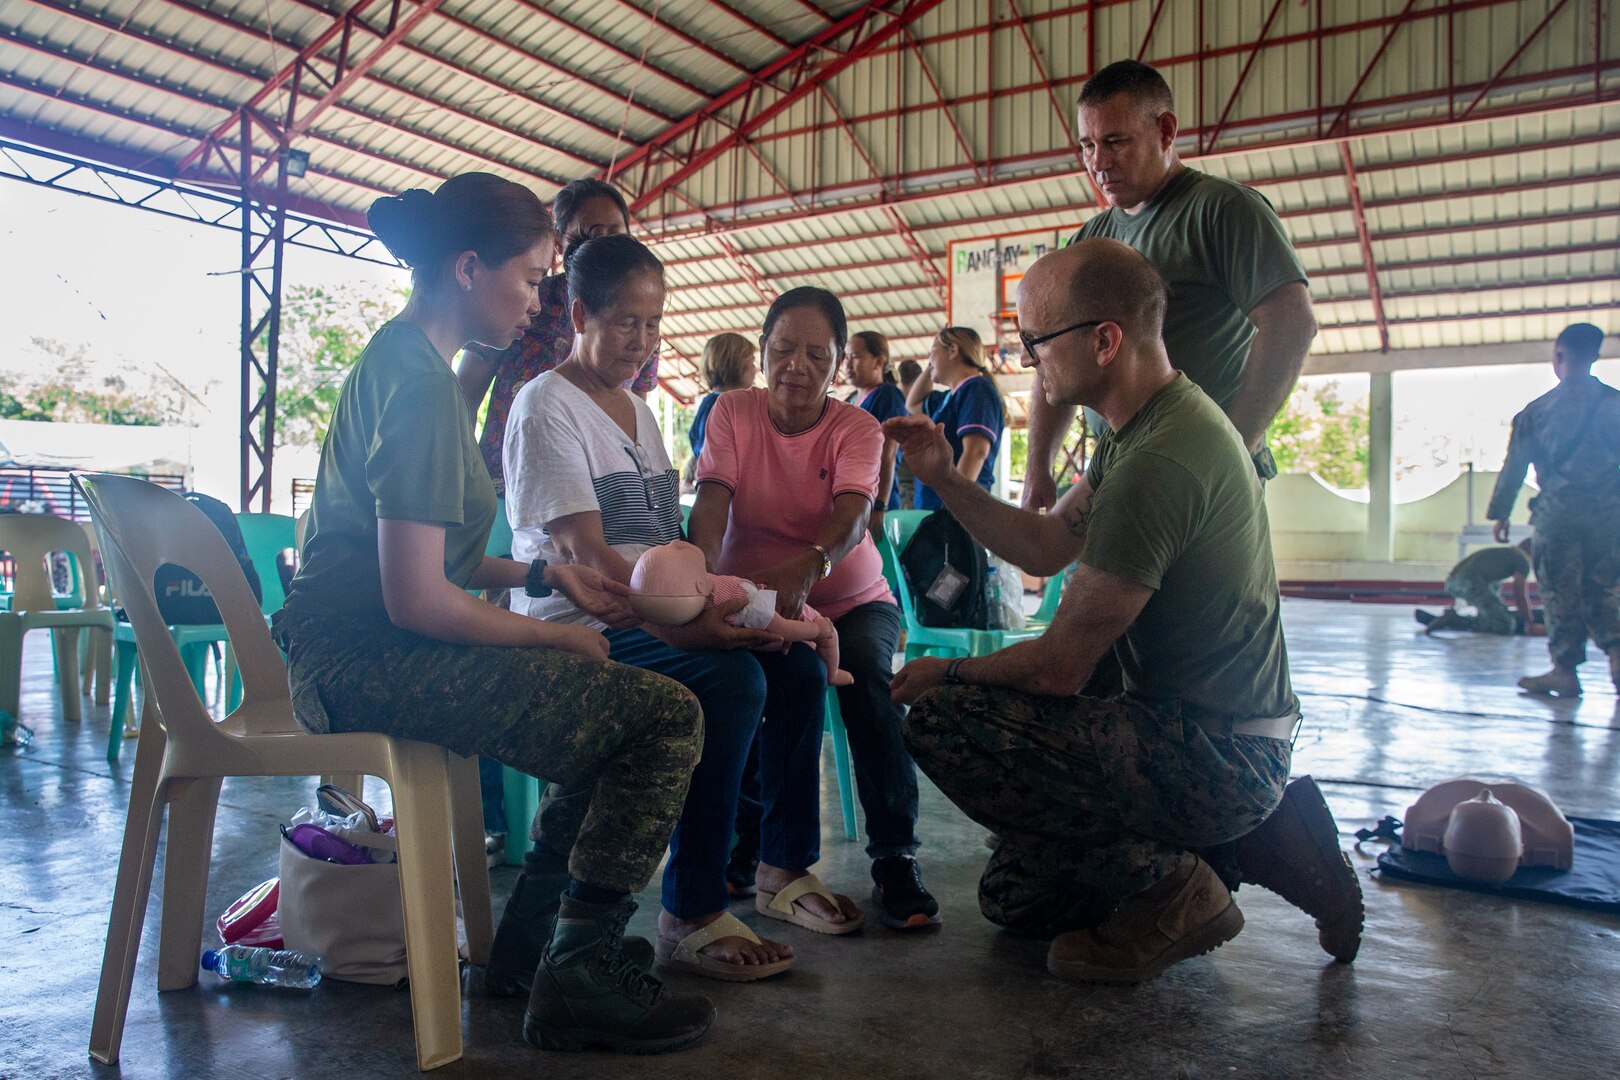 Philippine Army Maj. Johanaville Villanueva, left, a communicable diseases nurse and U.S. Navy Lt. Cmdr. David Loran, a nurse practitioner, guides Ilocos Norte residents applying cardiopulmonary resuscitation on a simulated infant during a community health engagement held before Exercise Balikatan 24 at Davila Elementary School in Pasuquin, Ilocos Norte, Philippines, April 21, 2024. The Philippine and U.S. service members trained Ilocos Norte healthcare workers and residents on basic lifesaving skills such as cardiopulmonary resuscitation and tactical combat casualty care, increasing emergency care access and awareness. BK 24 is an annual exercise between the Armed Forces of the Philippines and the U.S. military designed to strengthen bilateral interoperability, capabilities, trust, and cooperation built over decades of shared experiences. (U.S. Marine Corps photo by Cpl. Trent A. Henry)